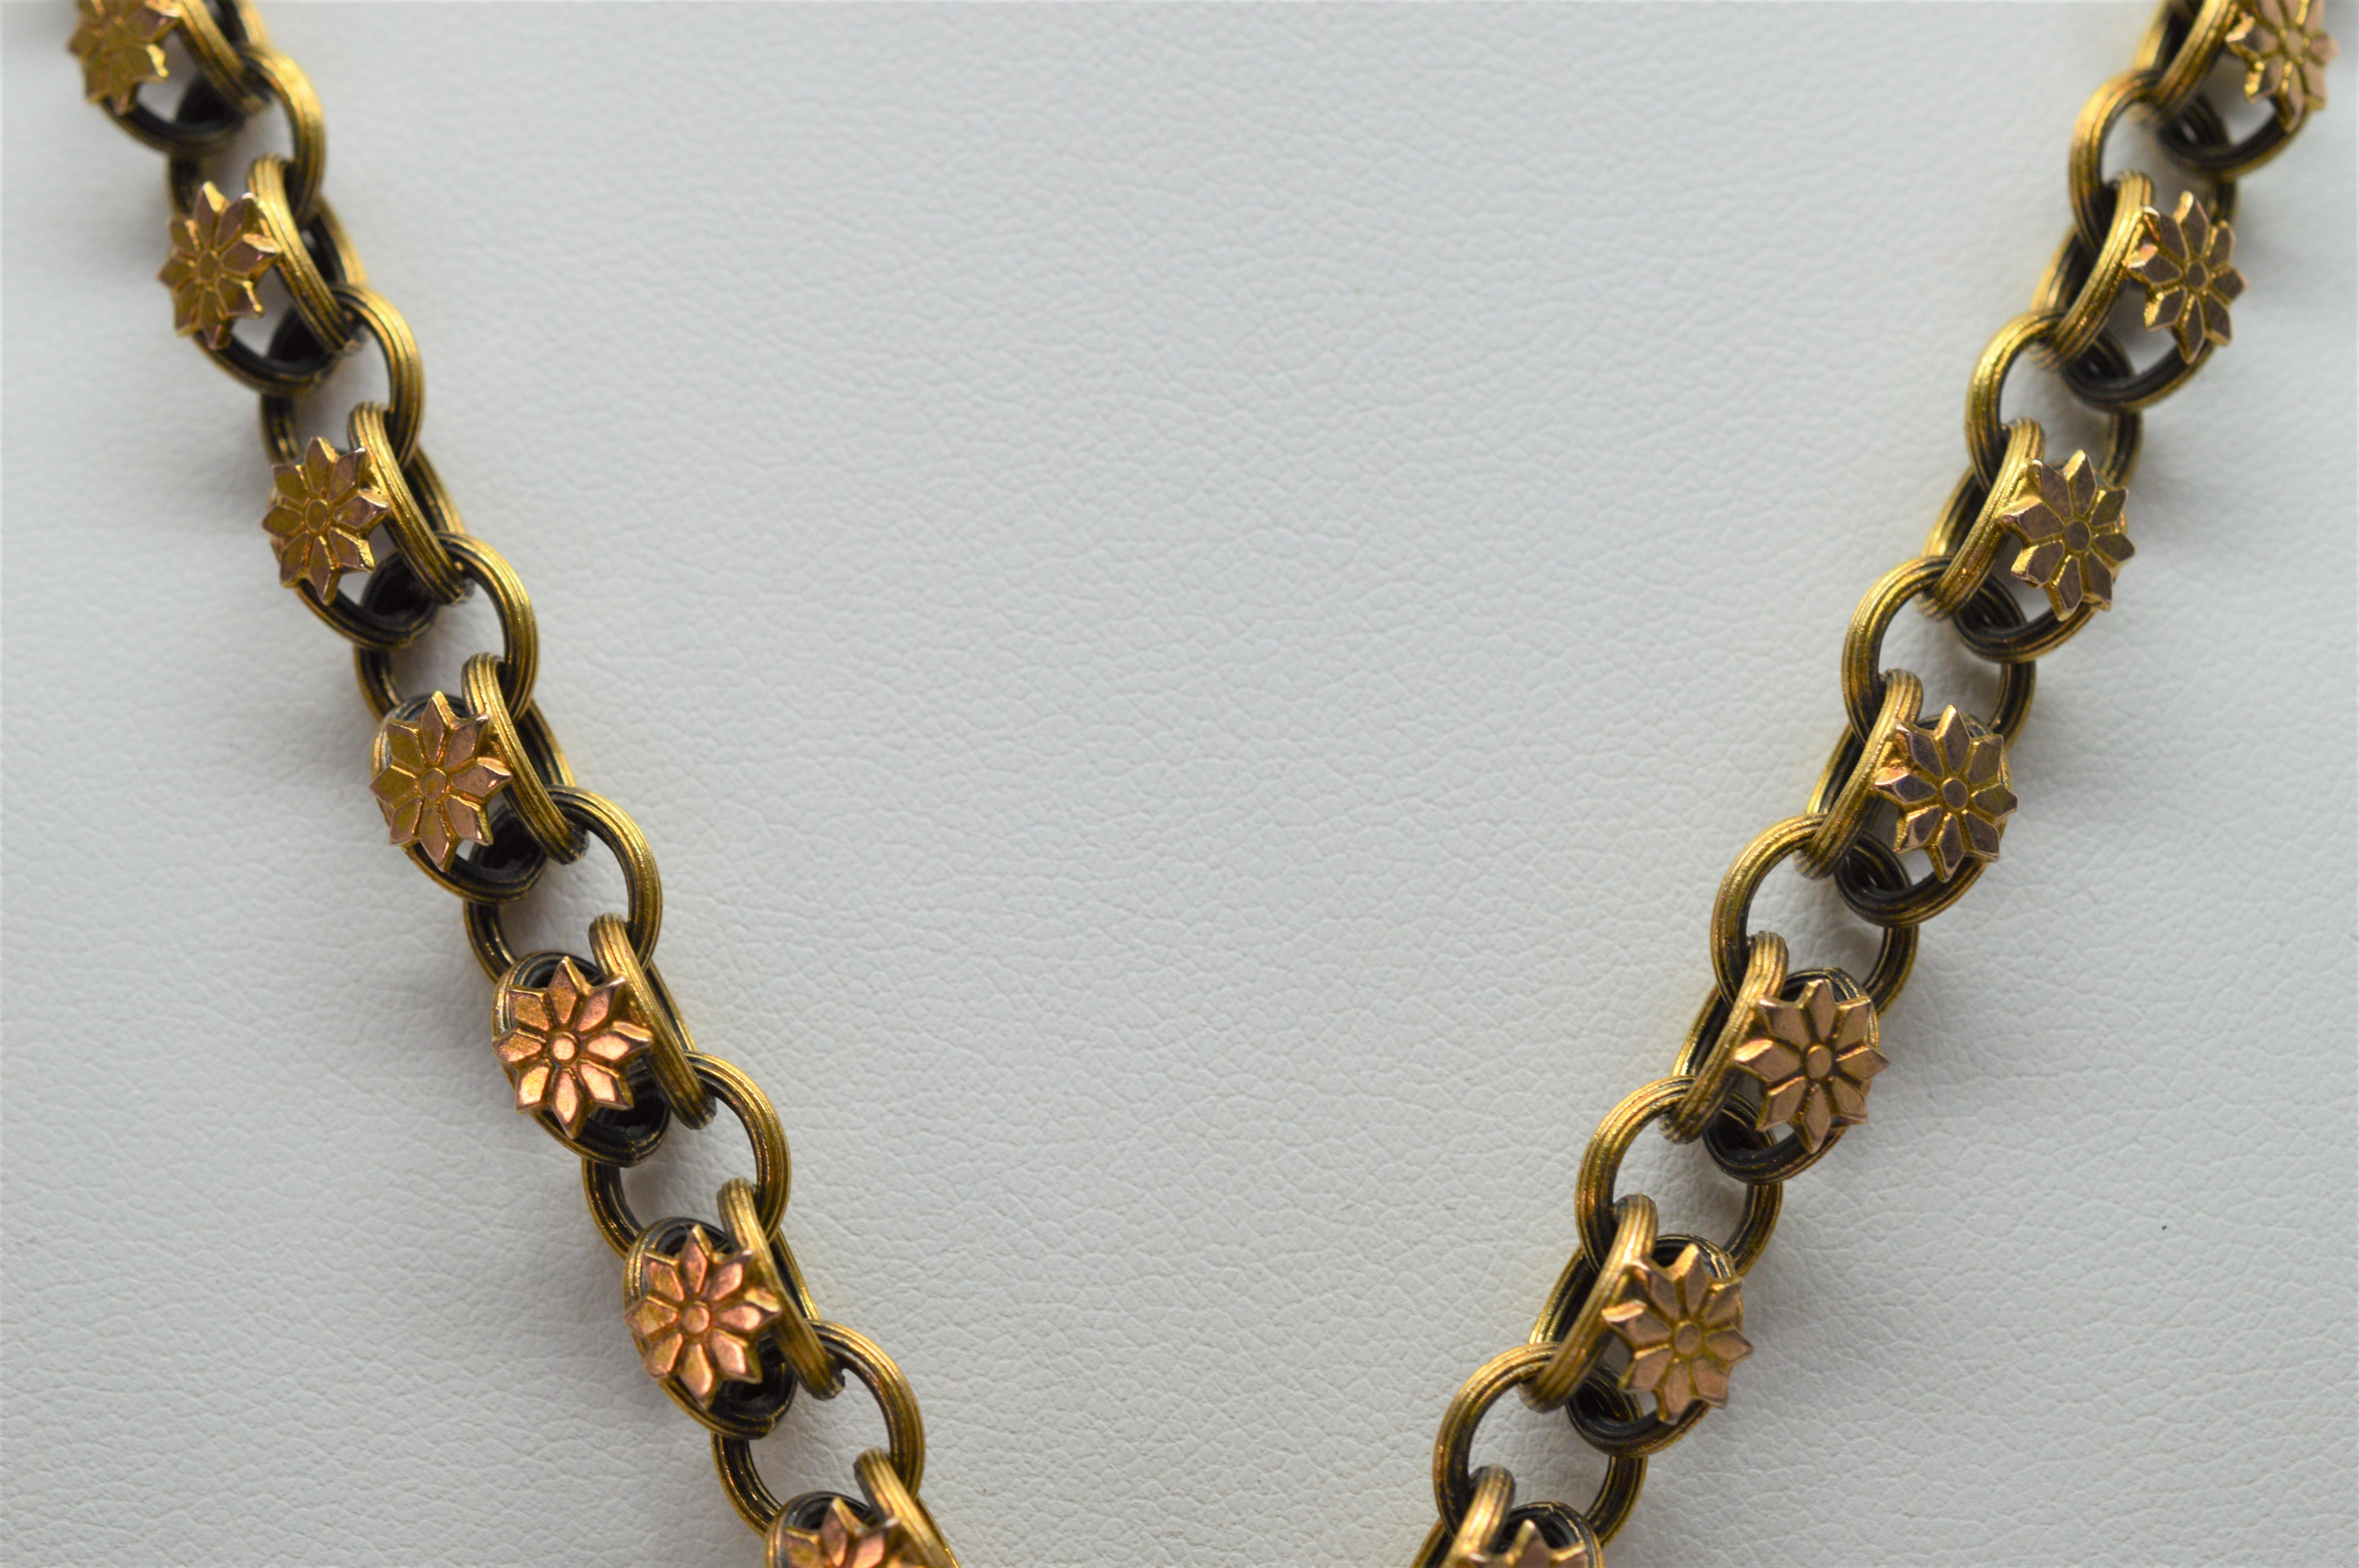 Antique 14 Karat Double Looped Chain Pendant Locket Necklace In Good Condition For Sale In Mount Kisco, NY